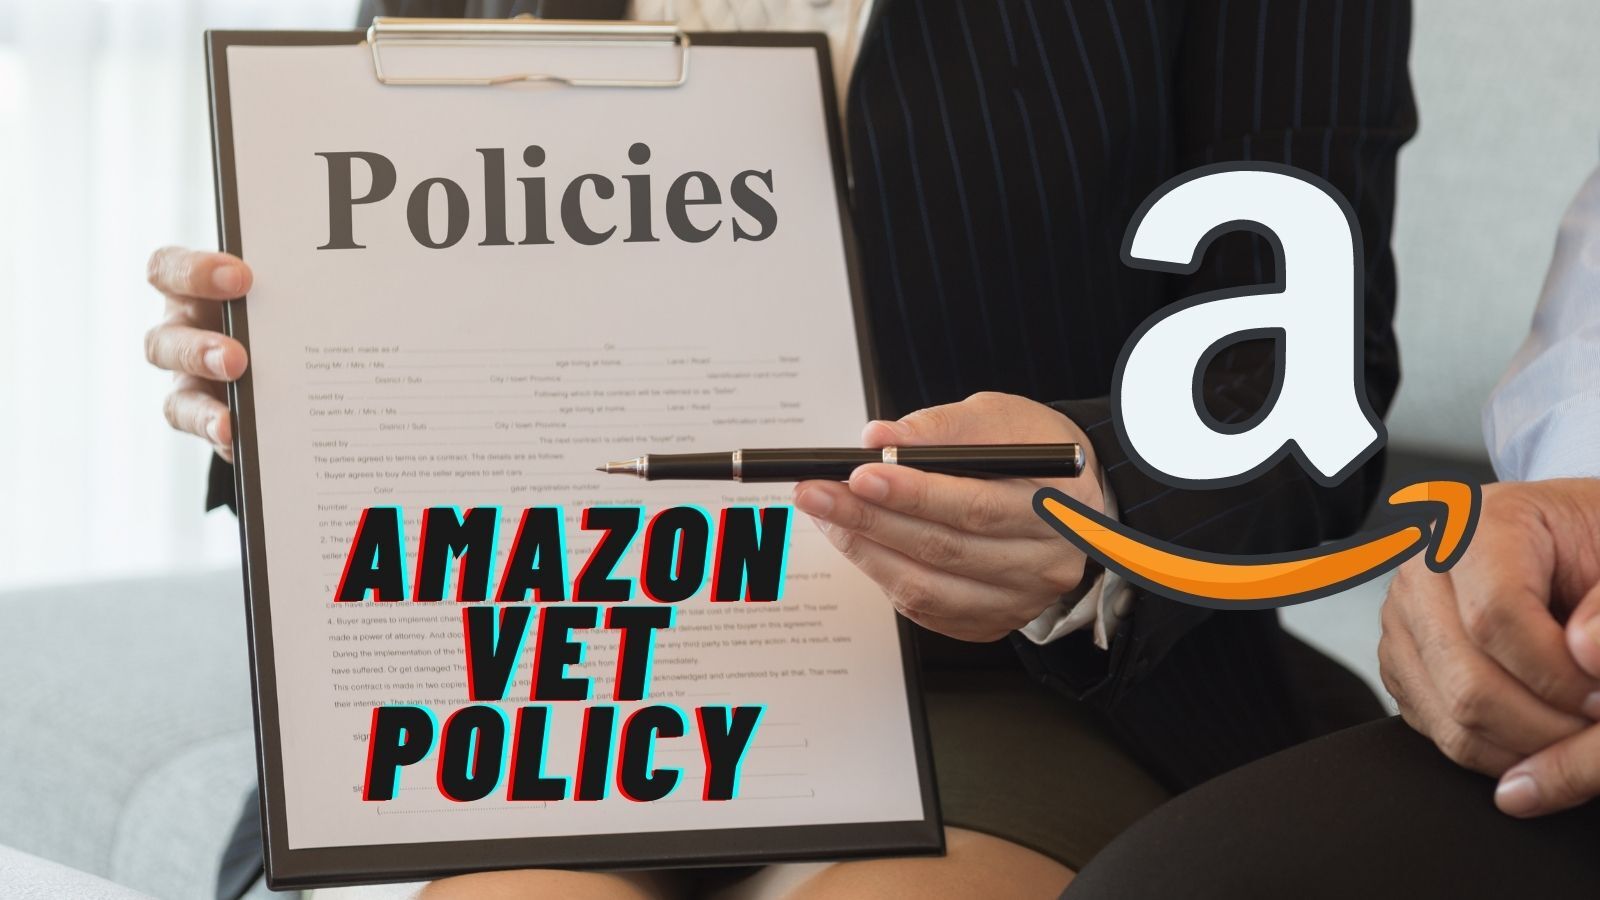 Amazon VET Policy in 2022: That's What You Are Interested In!